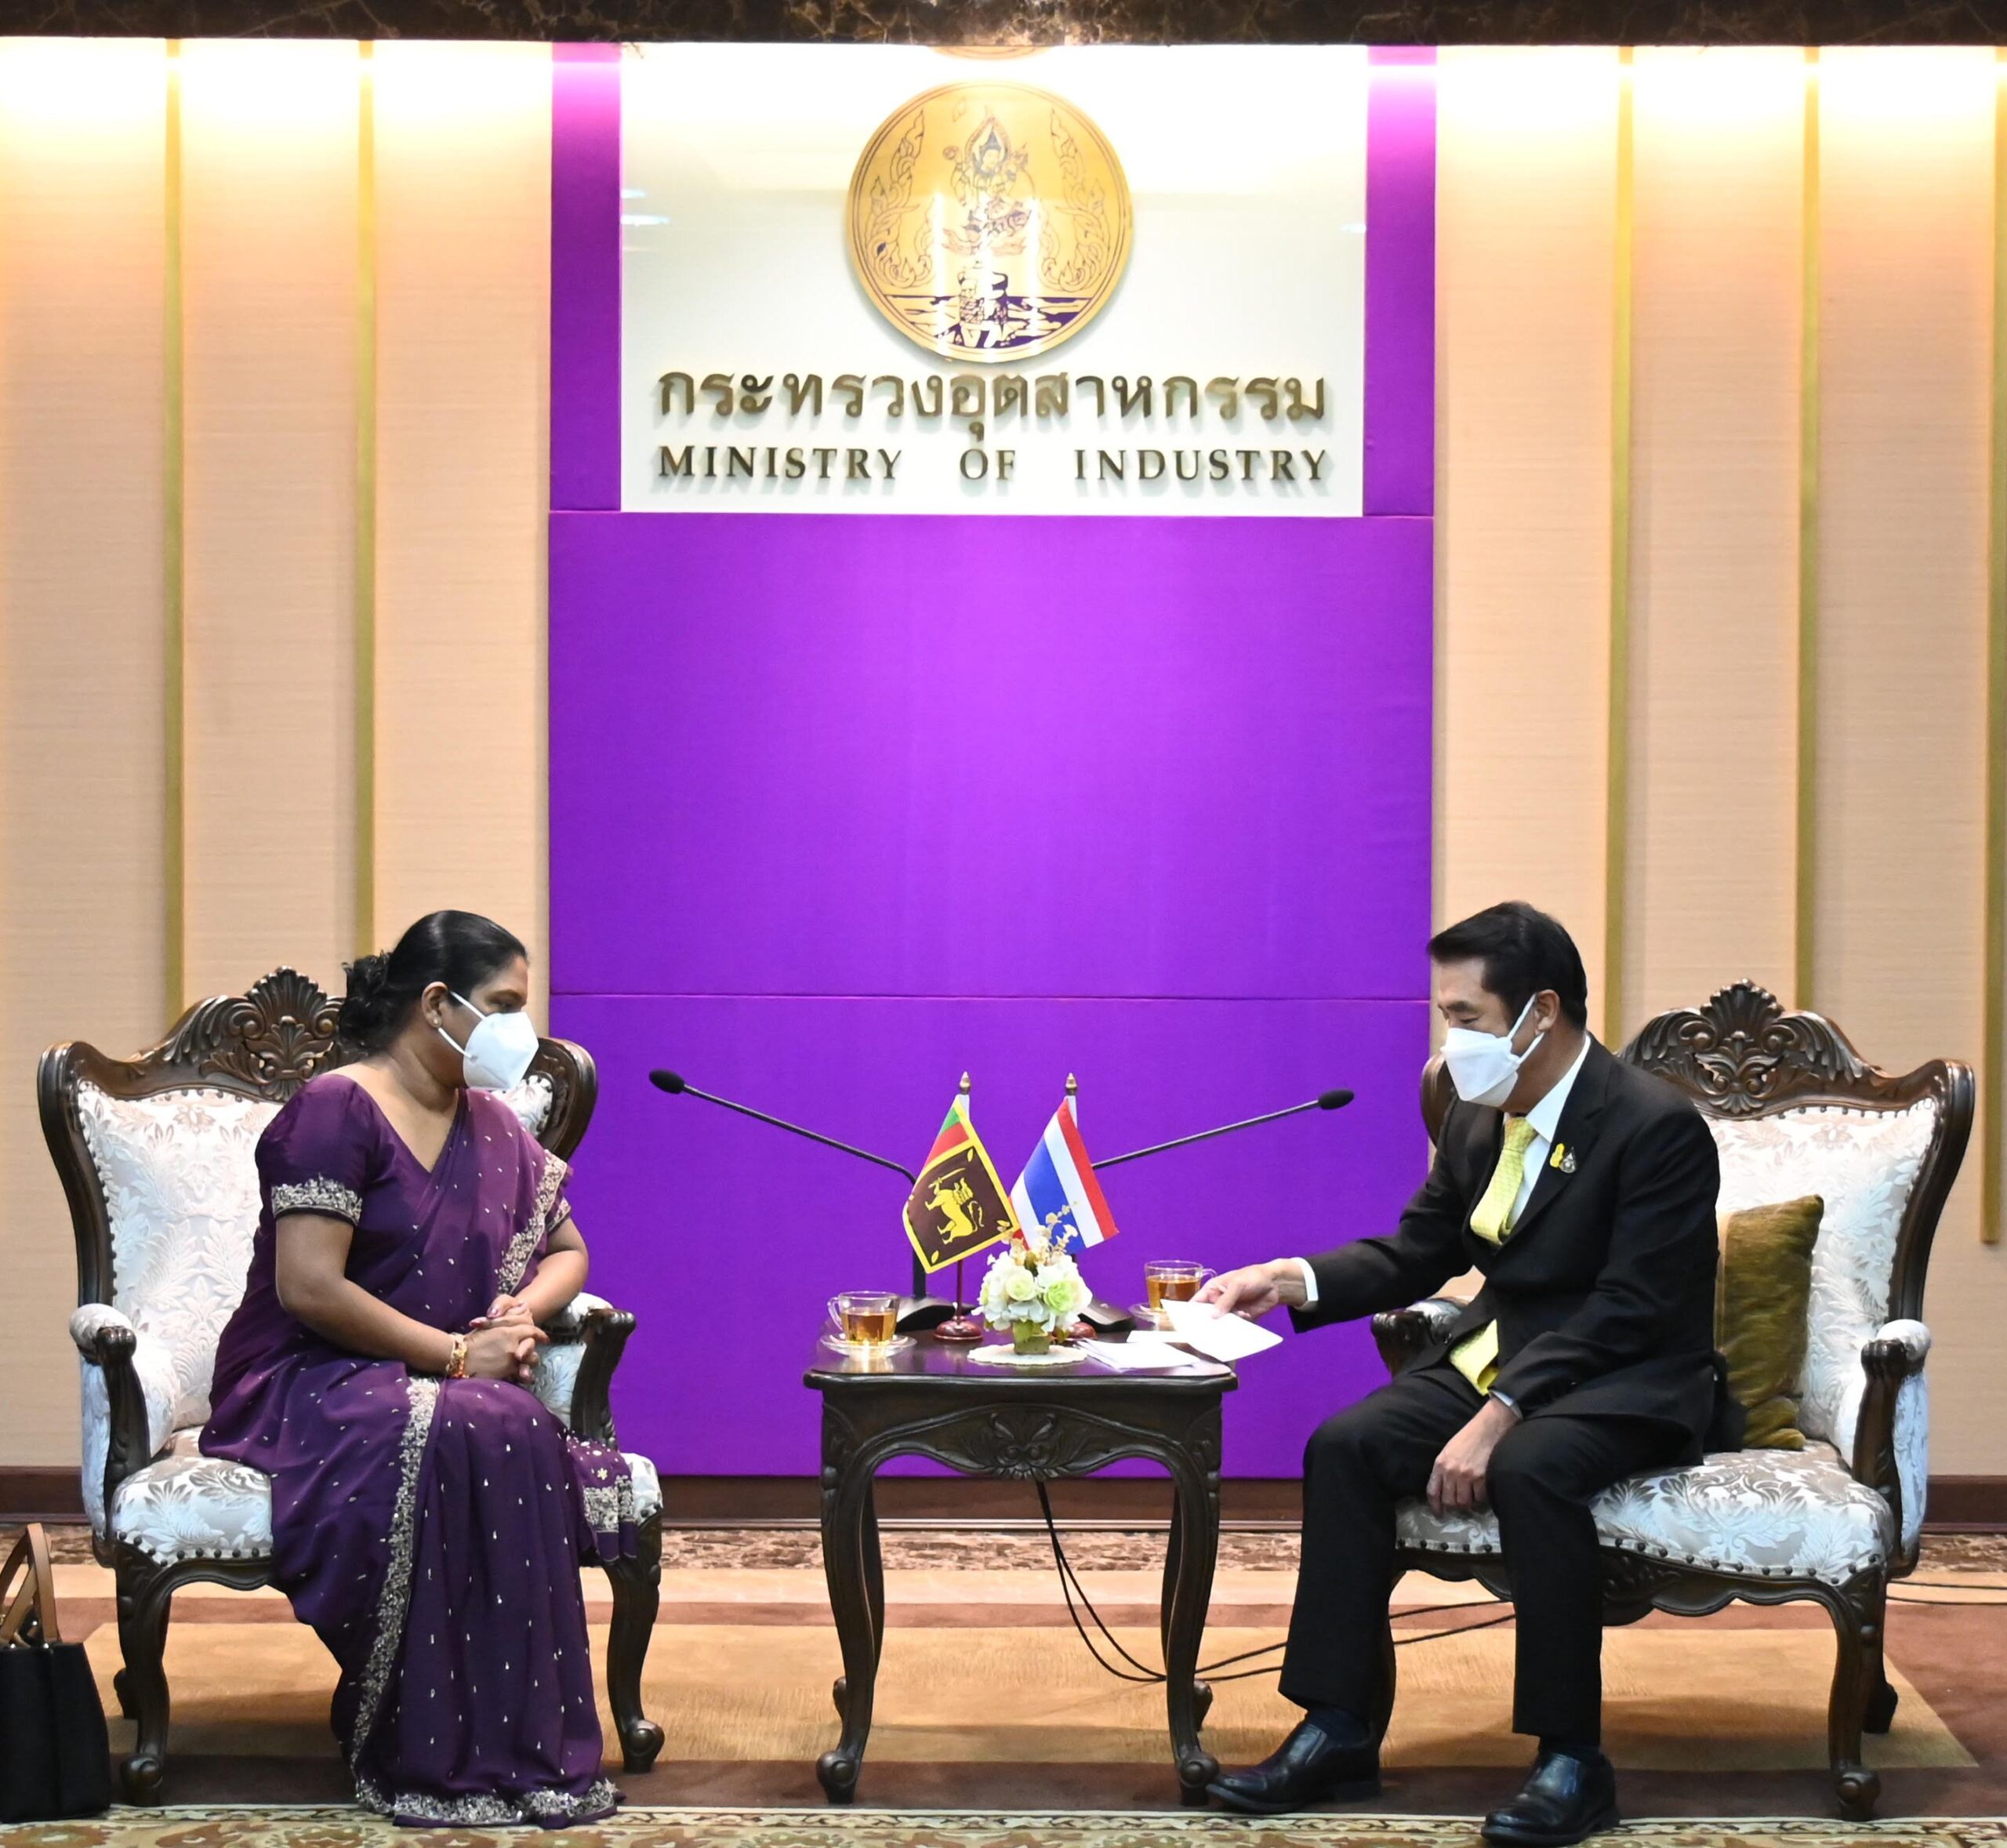 Ambassador Colonne discusses Economic and Industrial Cooperation with the Minister of Industry Suriya Jungrungreangkit of Thailand